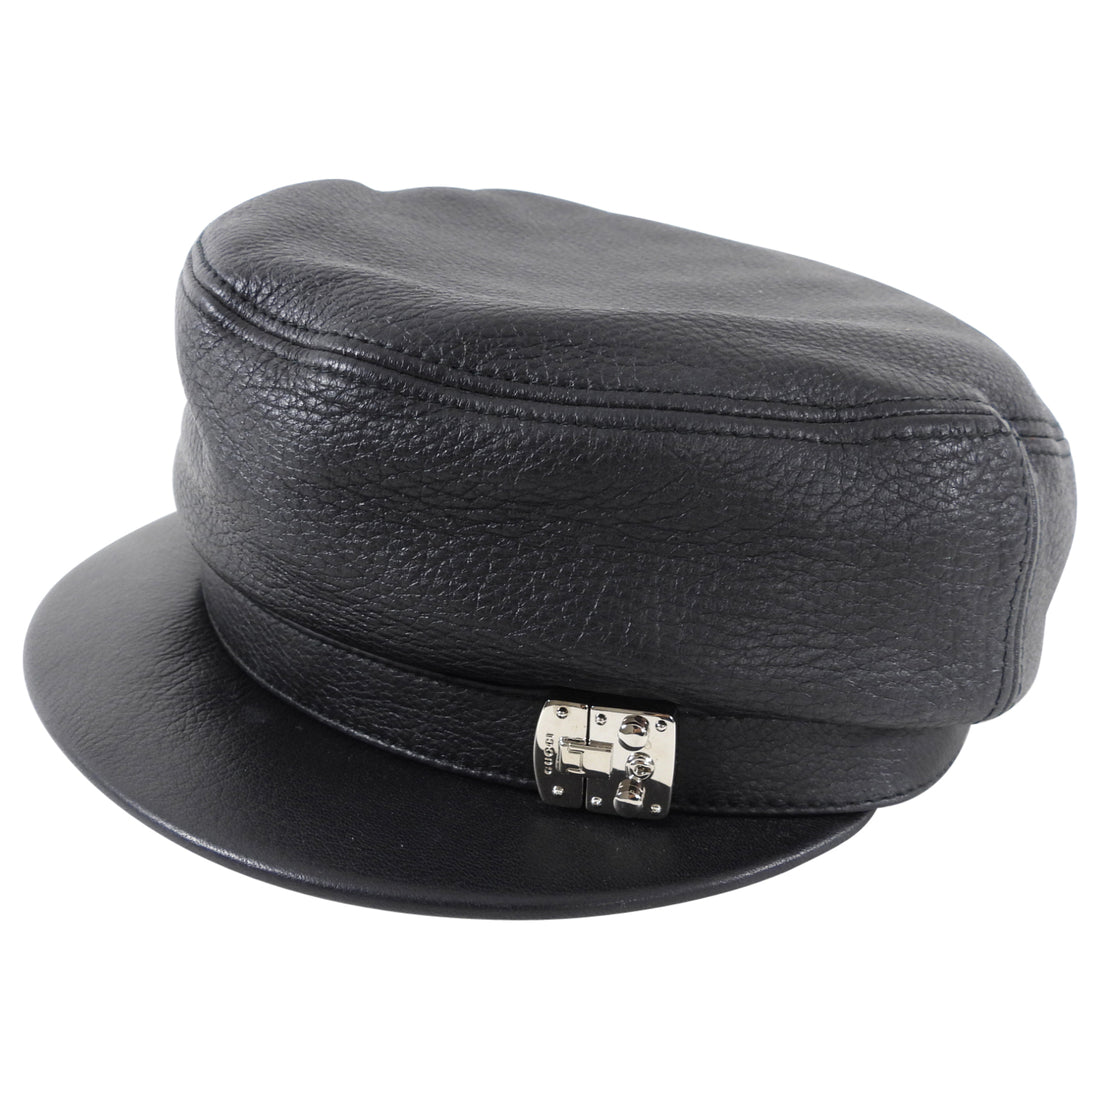 Gucci Black Leather Newsboy Hat with Silver Detail